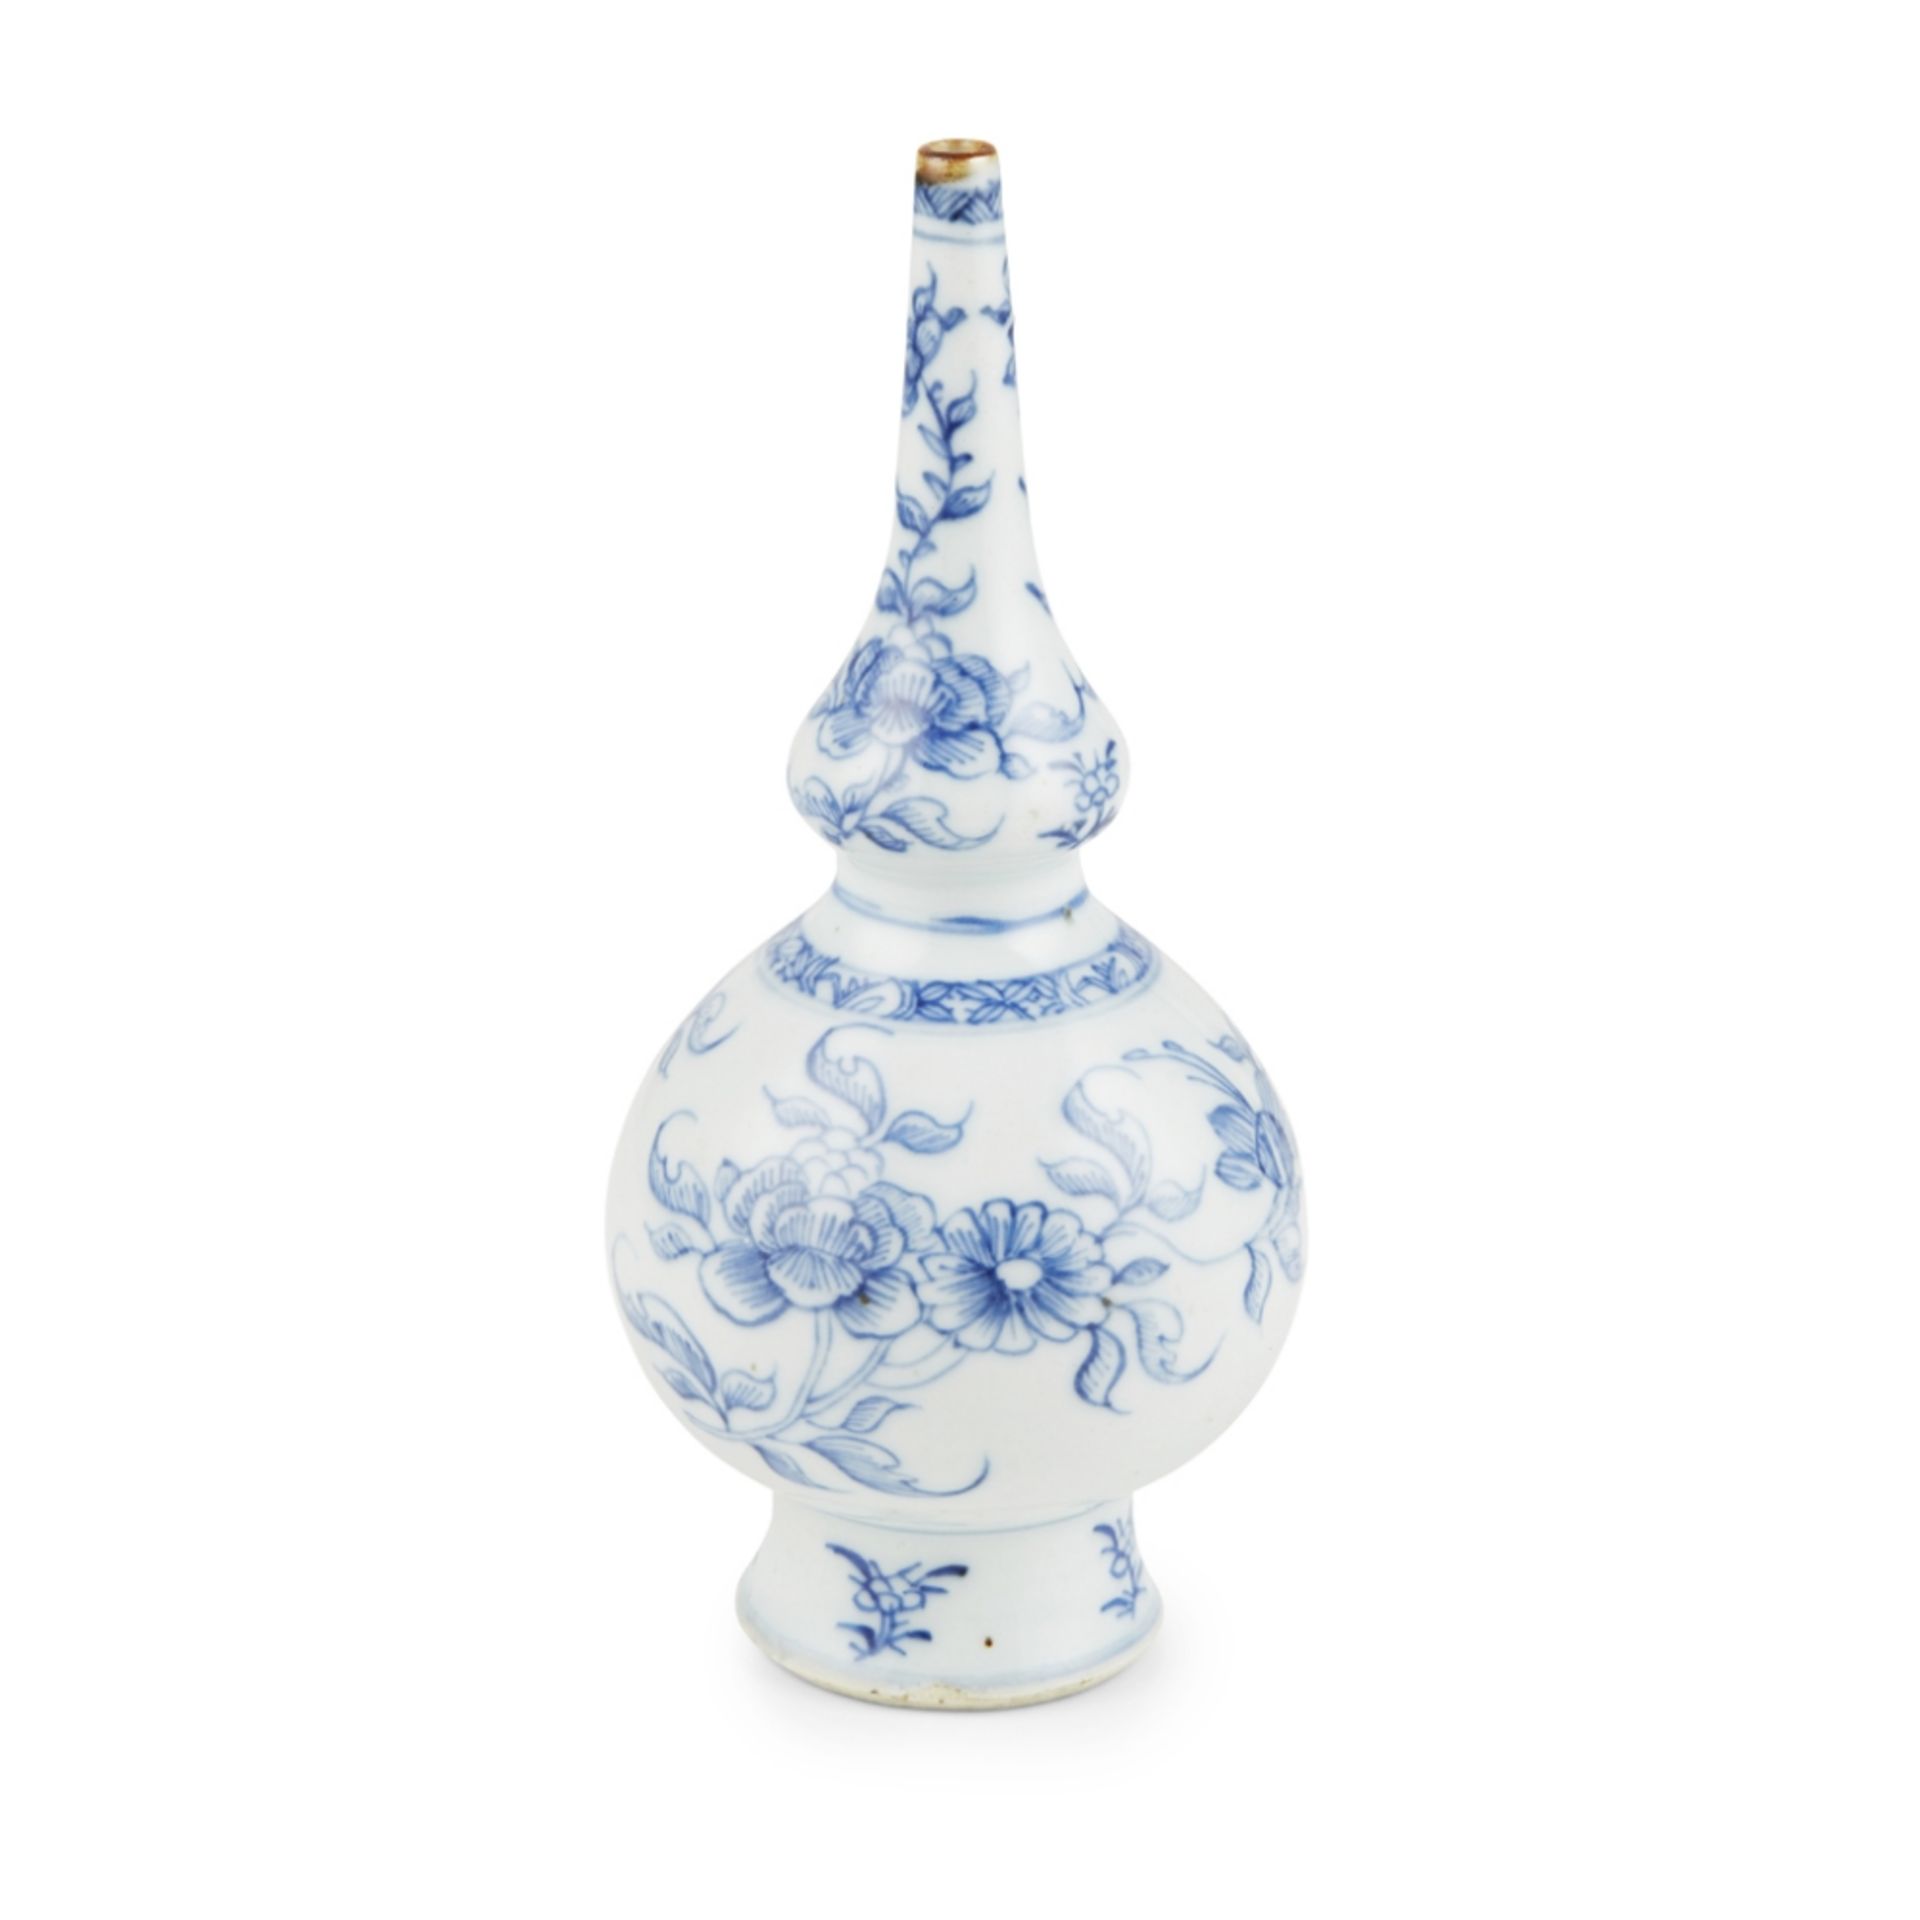 BLUE AND WHITE ROSEWATER SPRINKLERYONGZHENG PERIOD of double-gourd shape with a long spout,